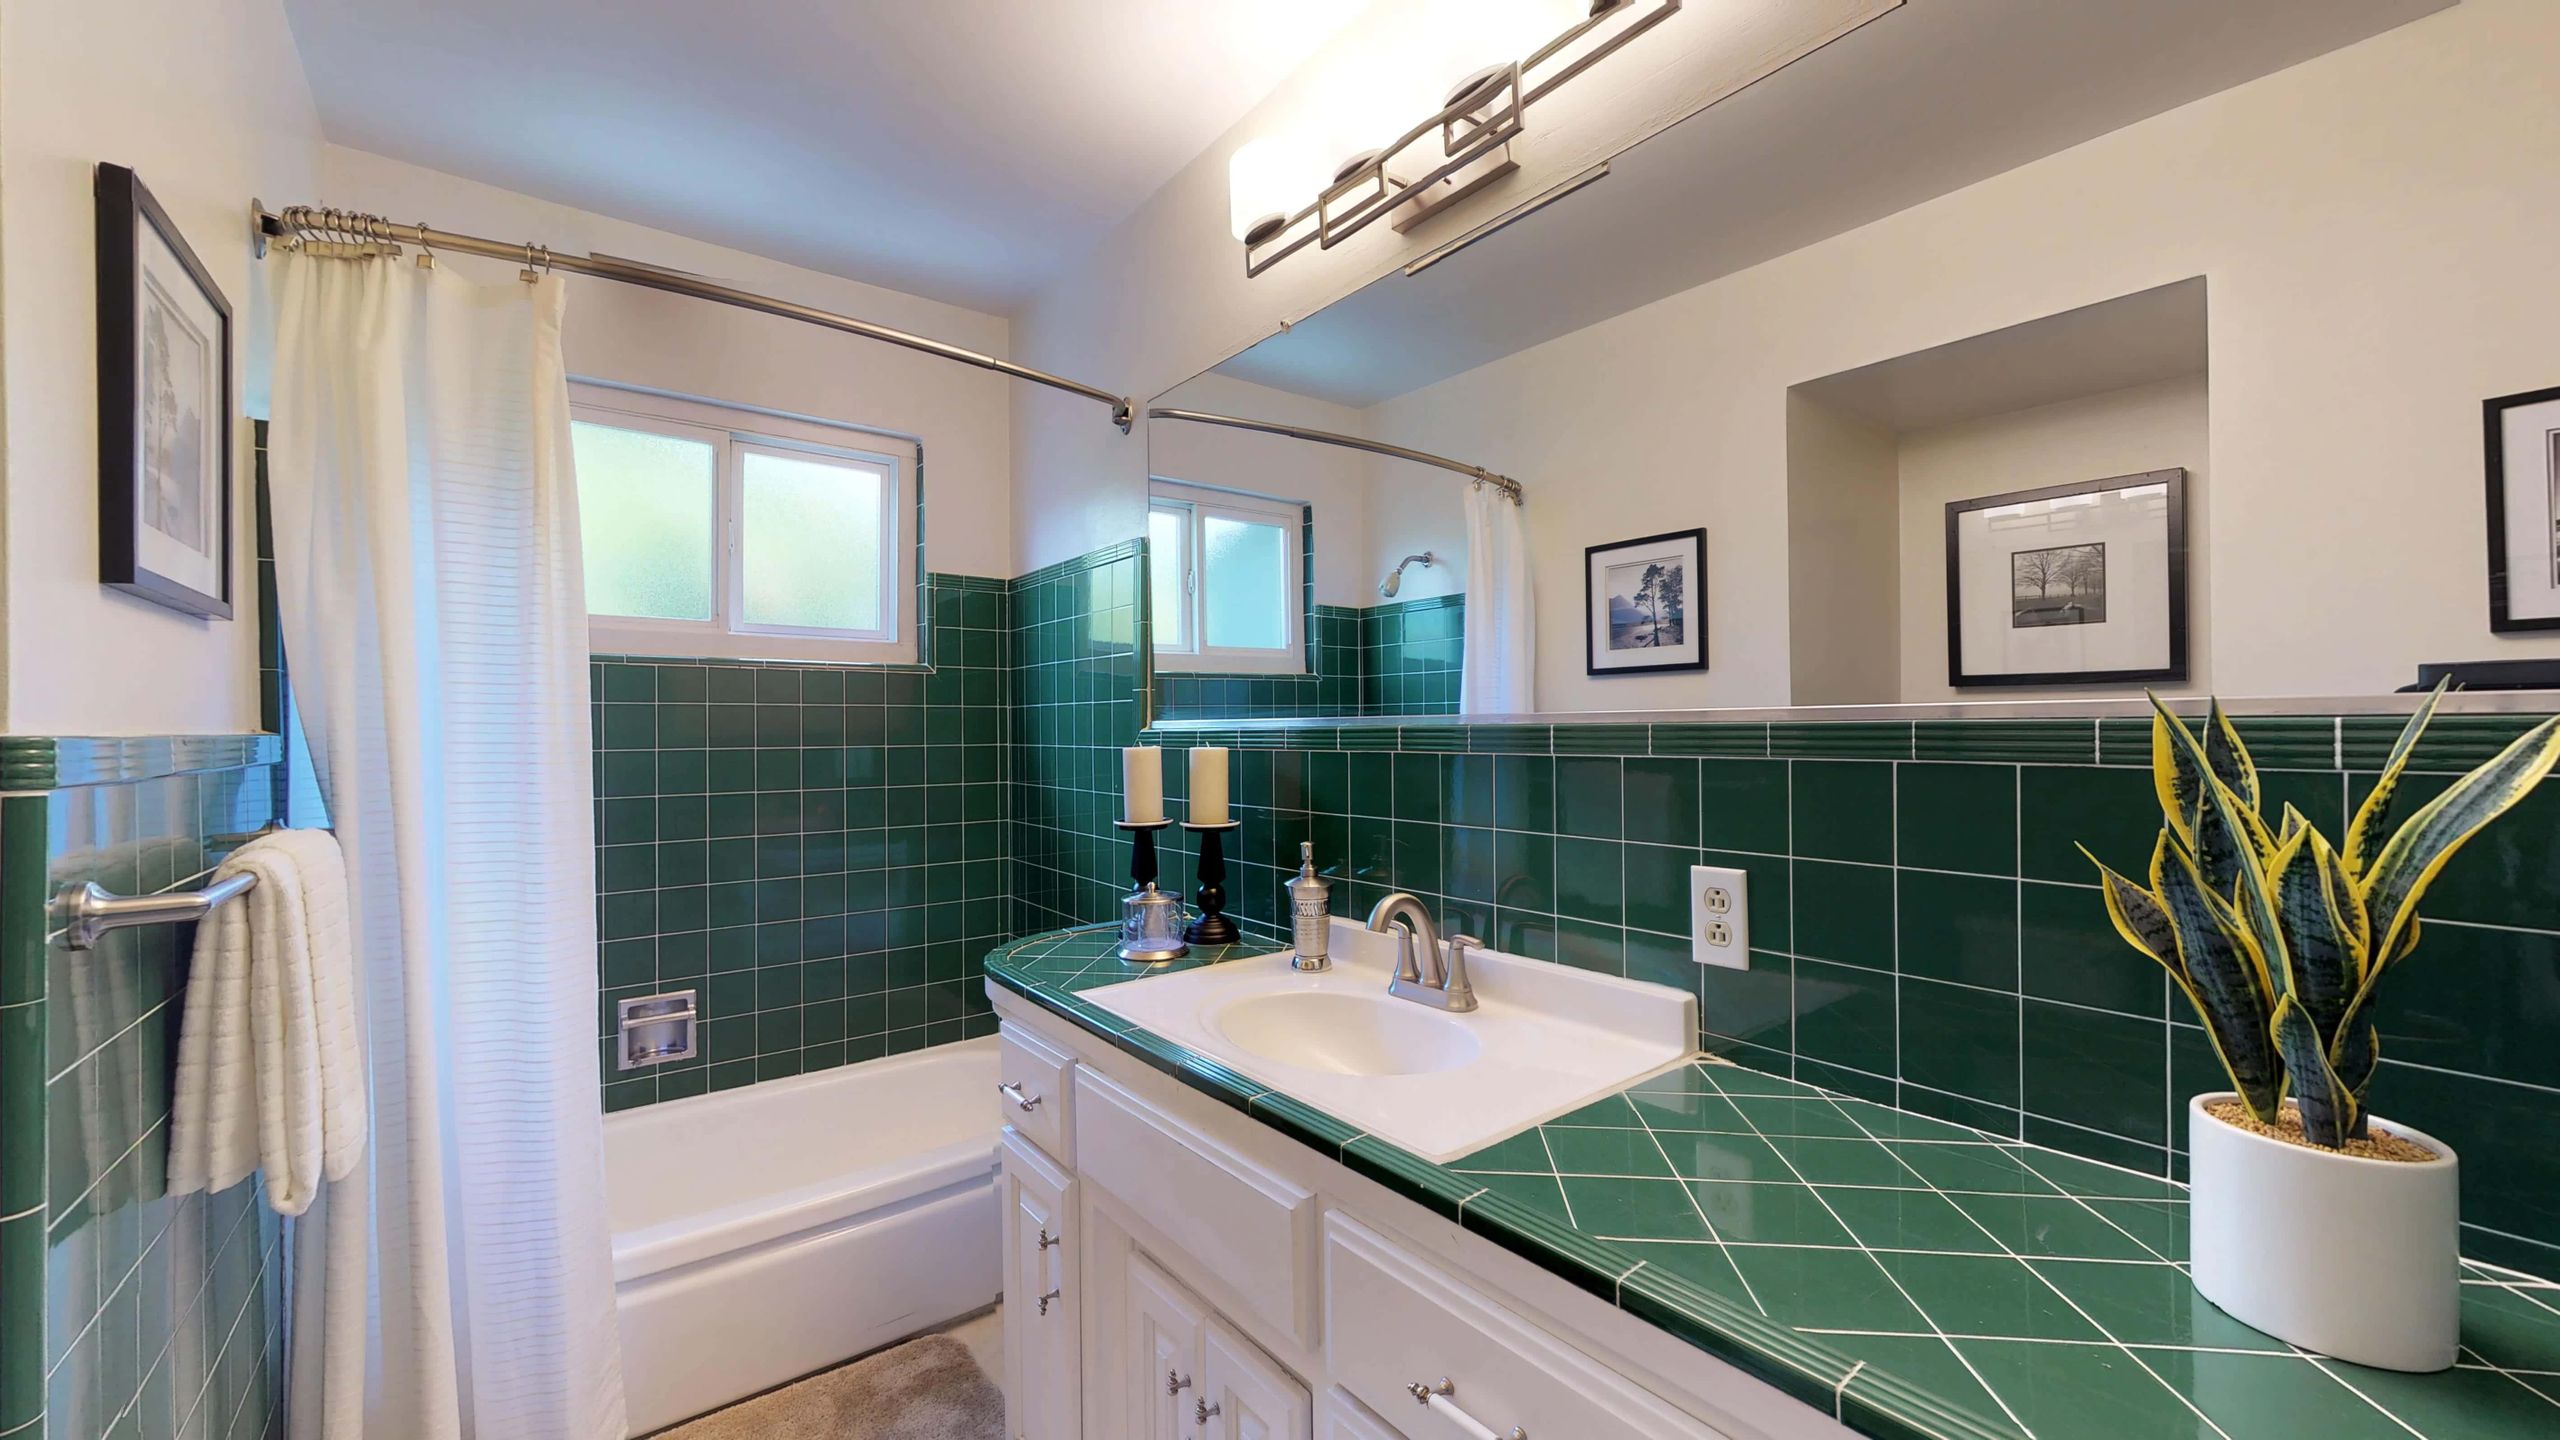 A bathroom with green tile and white cabinets.